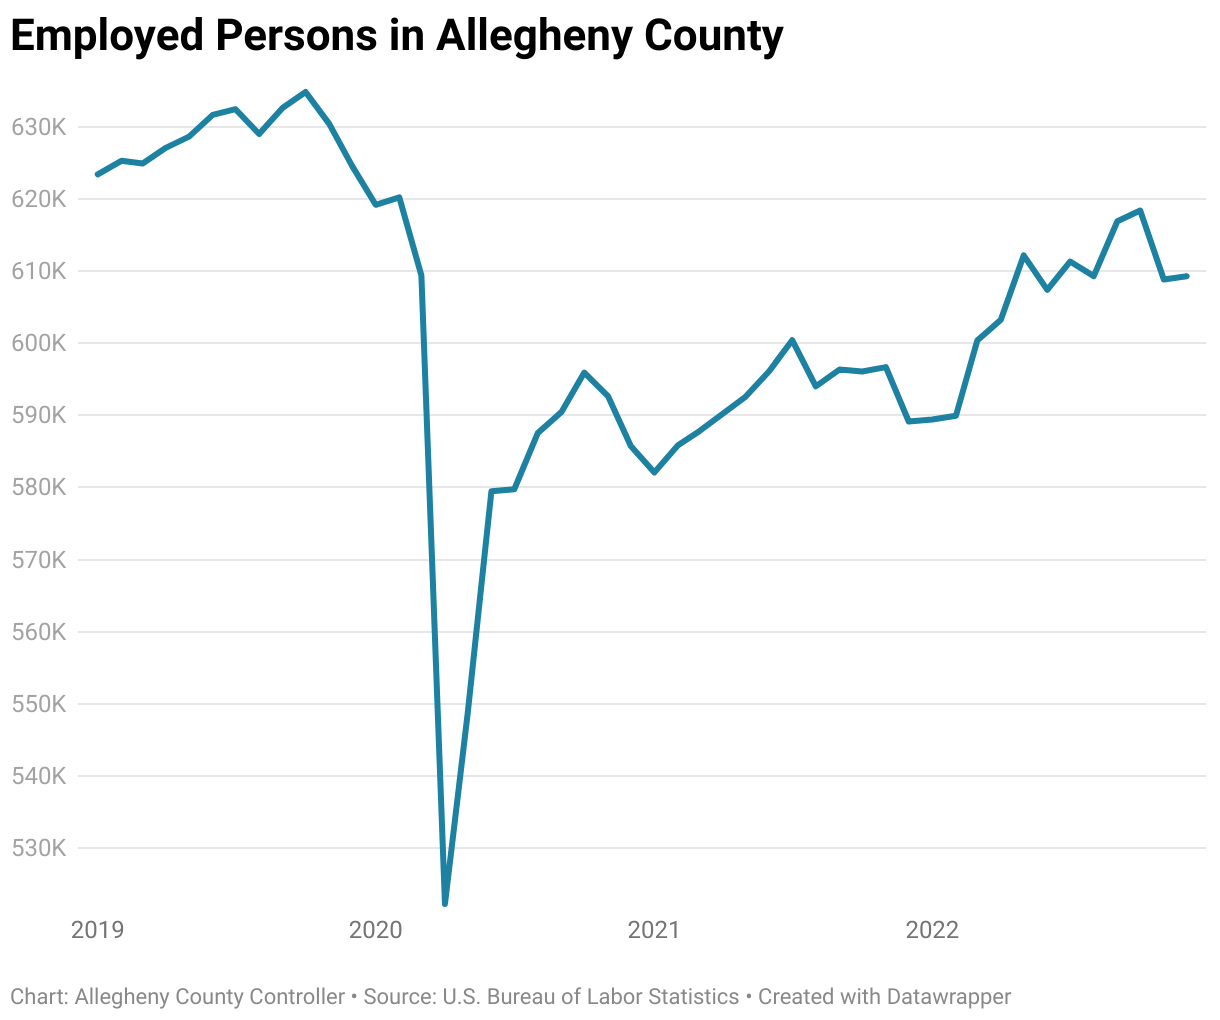 Graph showing the number of employed persons in Allegheny County from 2019 through 2022.